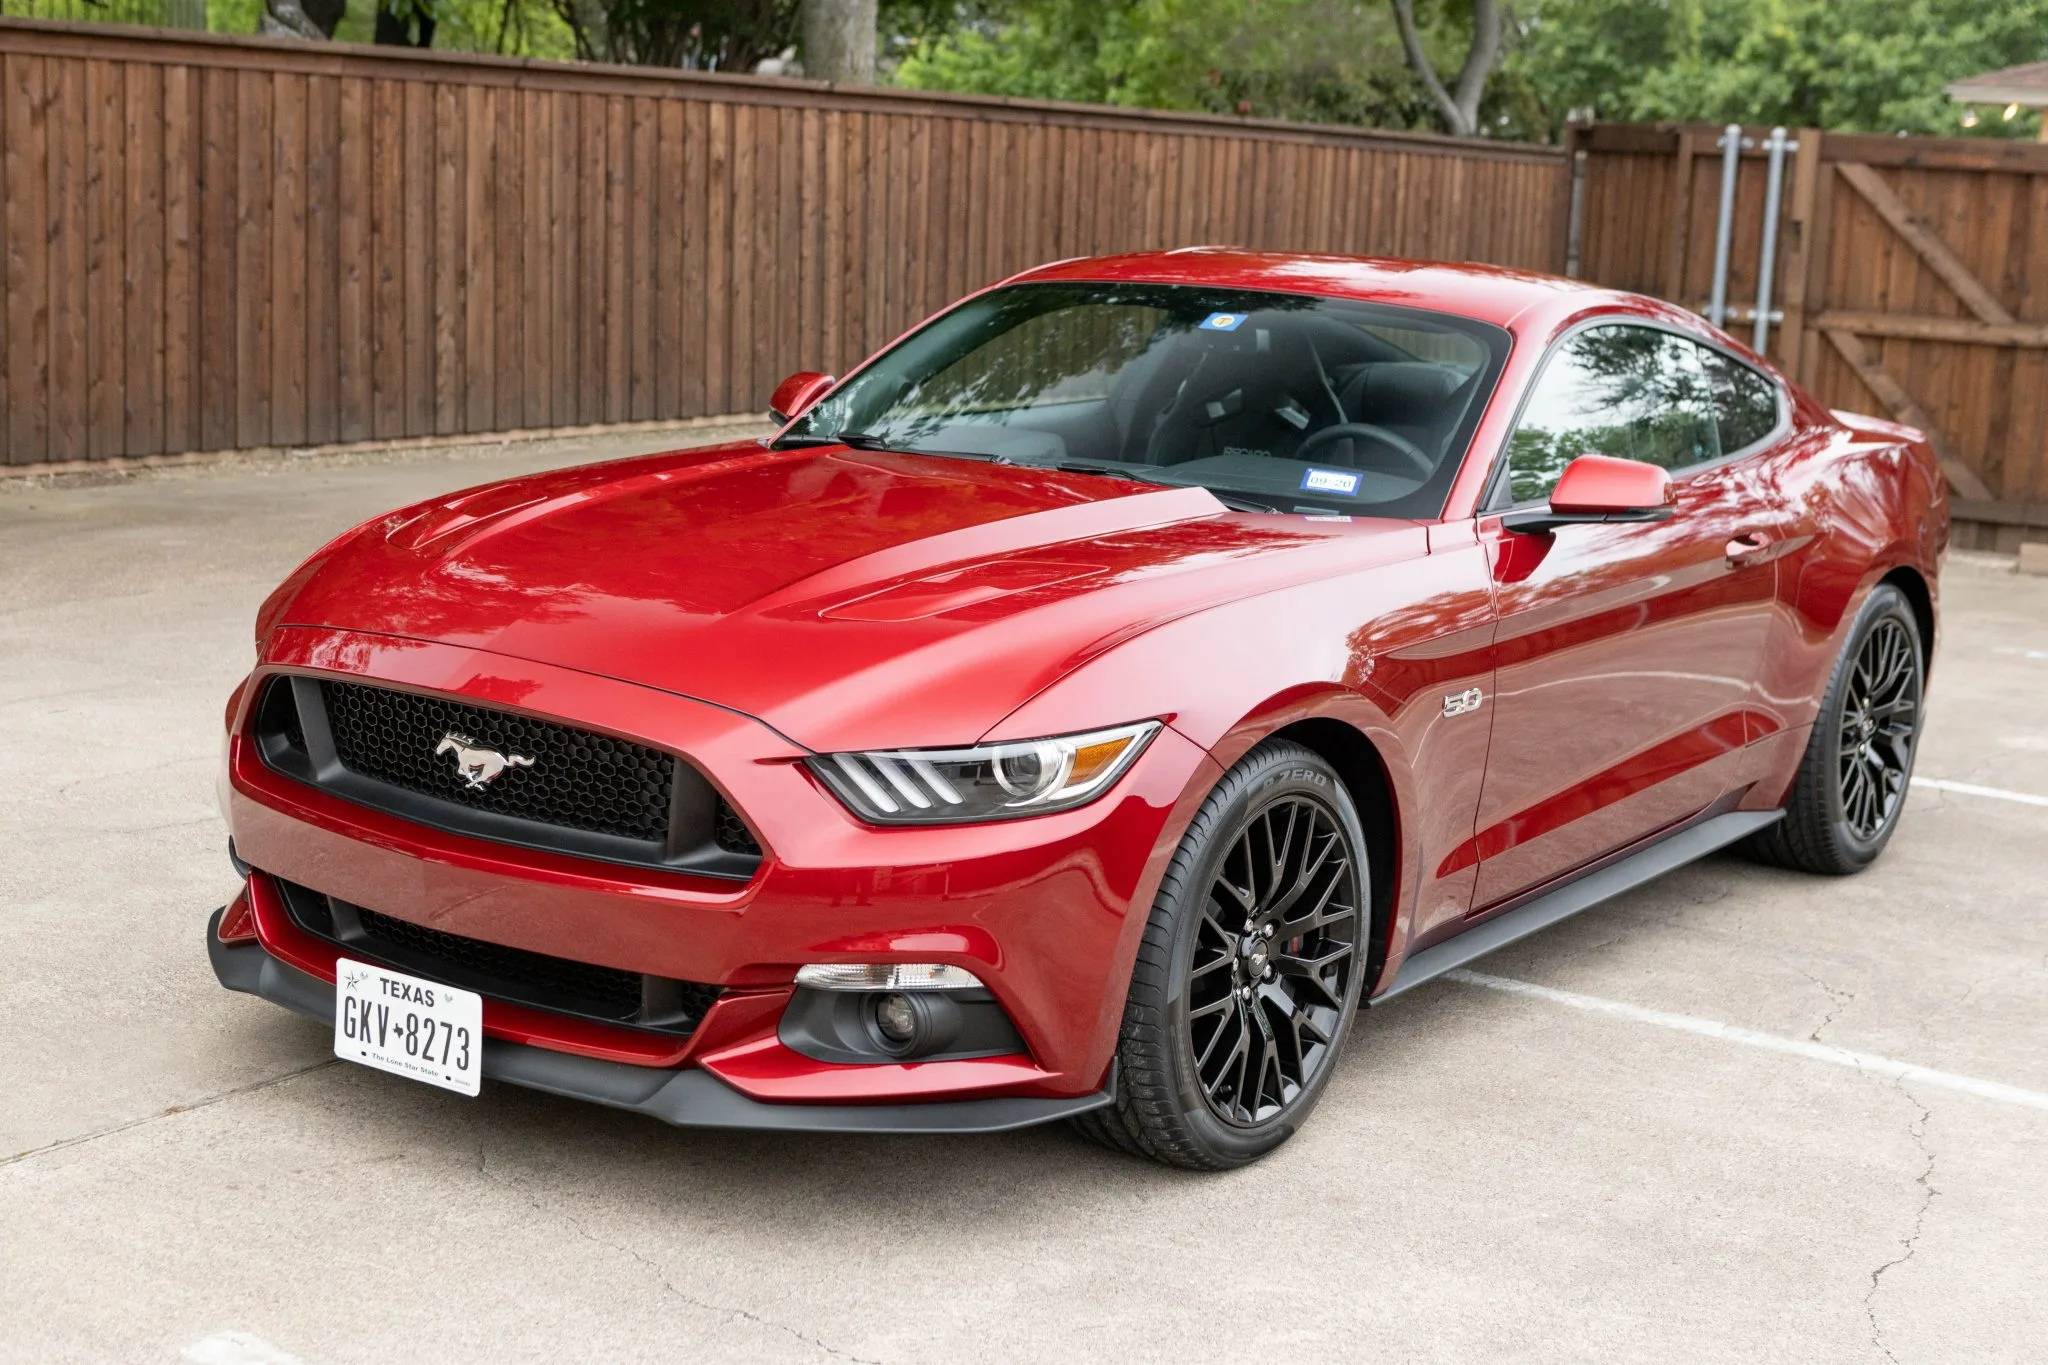 Mustang Of The Day: 2016 Ford Mustang GT